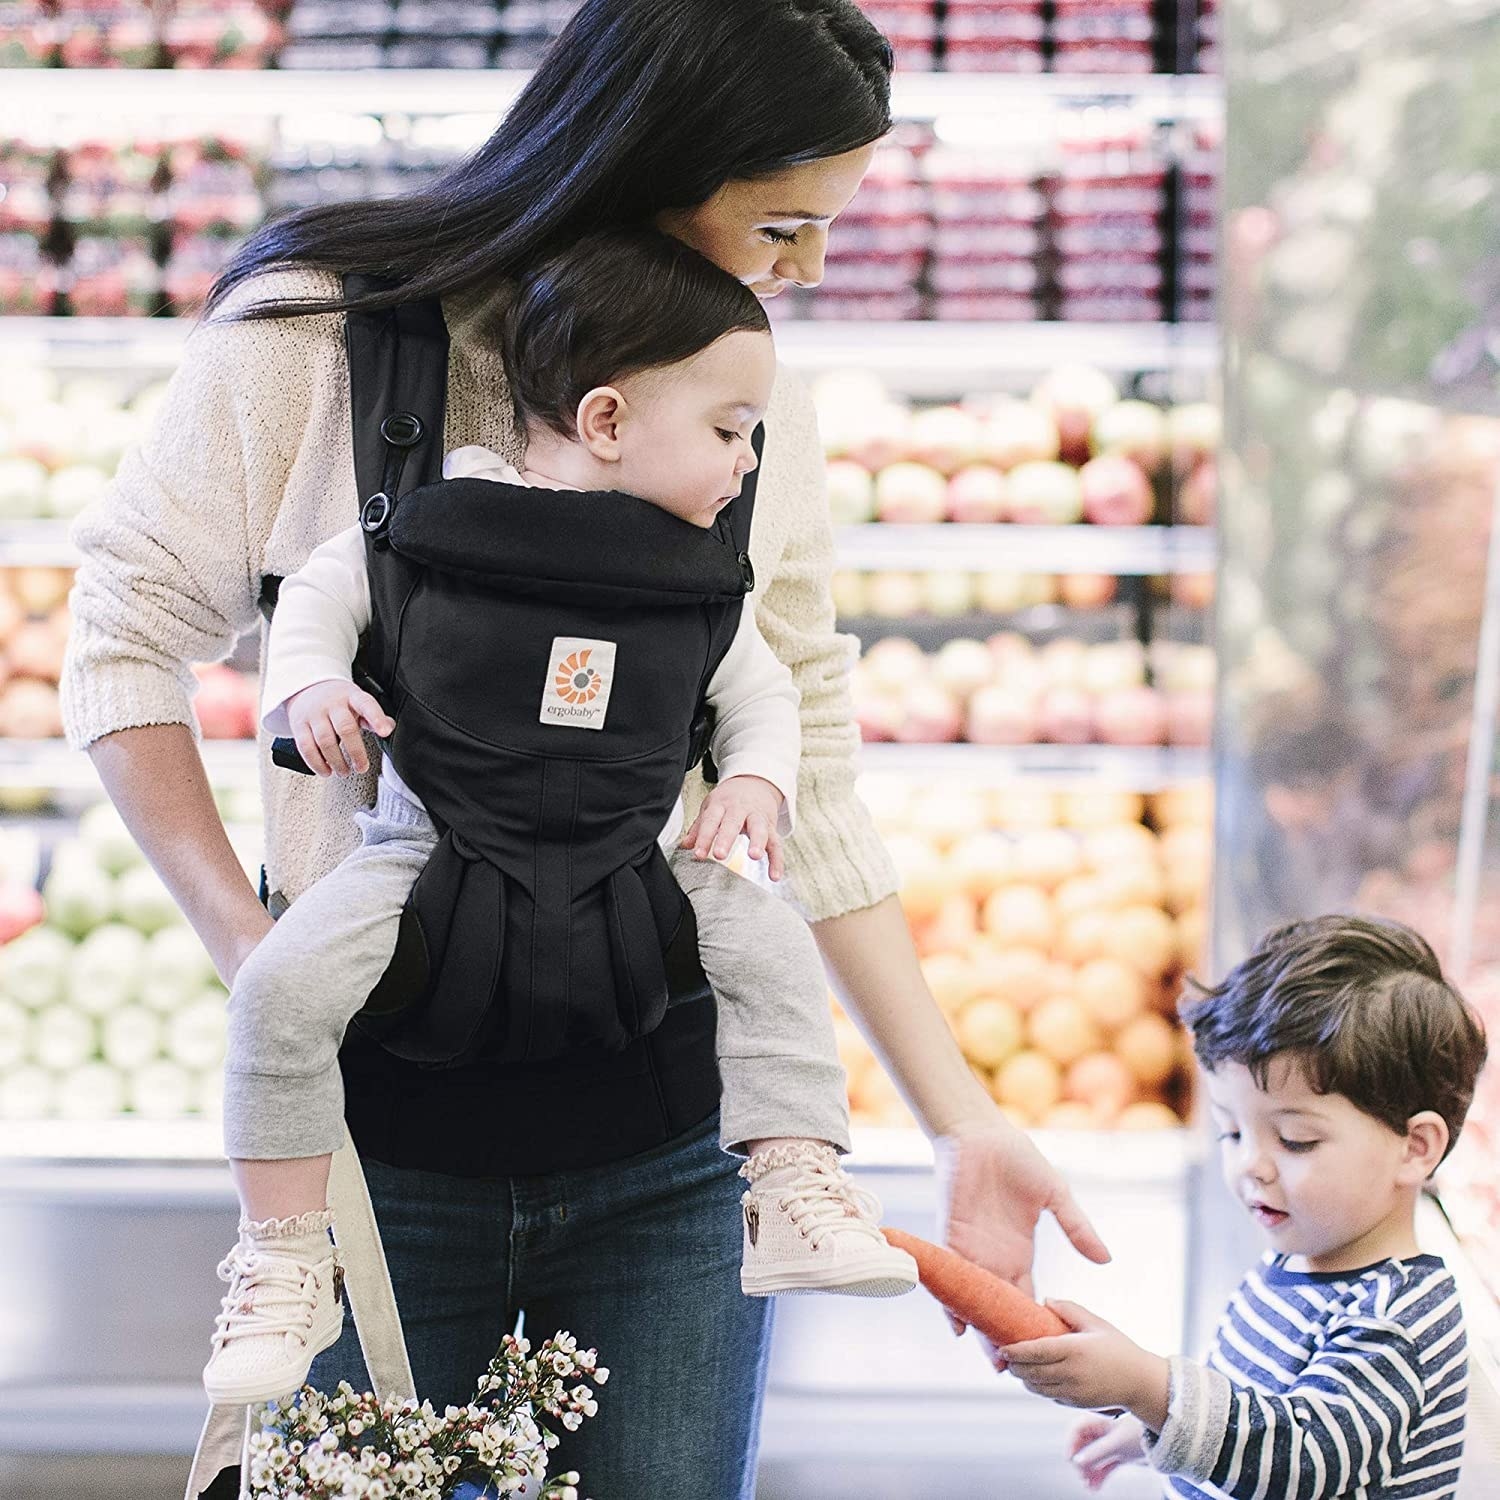 Woman holding a baby in the baby carrier